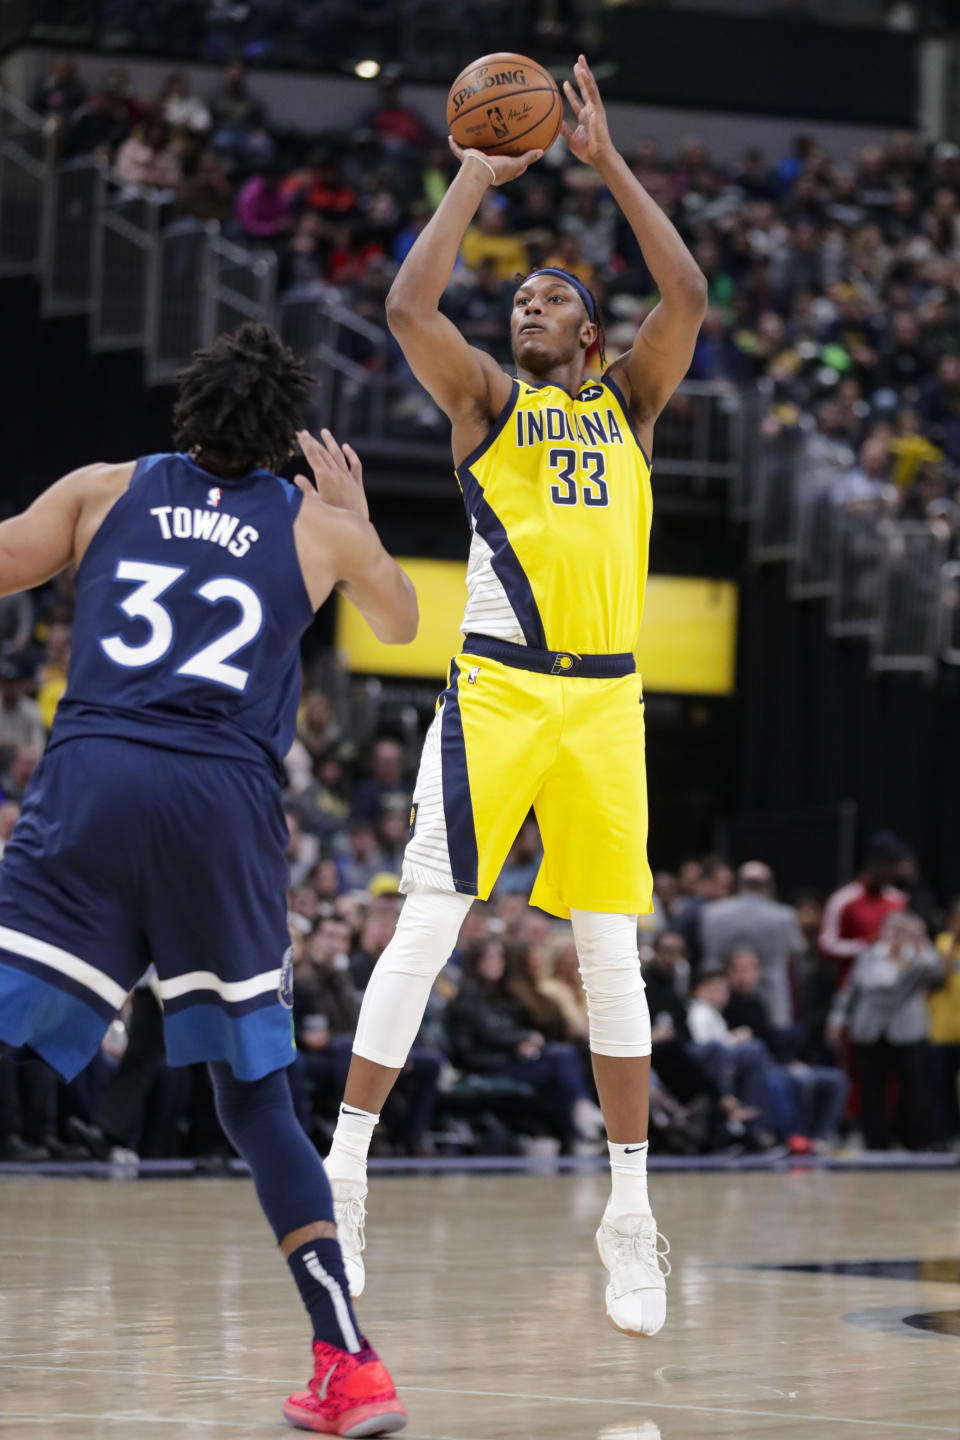 Indiana Pacers center Myles Turner (33) shoots over Minnesota Timberwolves center Karl-Anthony Towns (32) during the second half of an NBA basketball game in Indianapolis, Friday, Jan. 17, 2020. The Pacers won 116-114. (AP Photo/Michael Conroy)